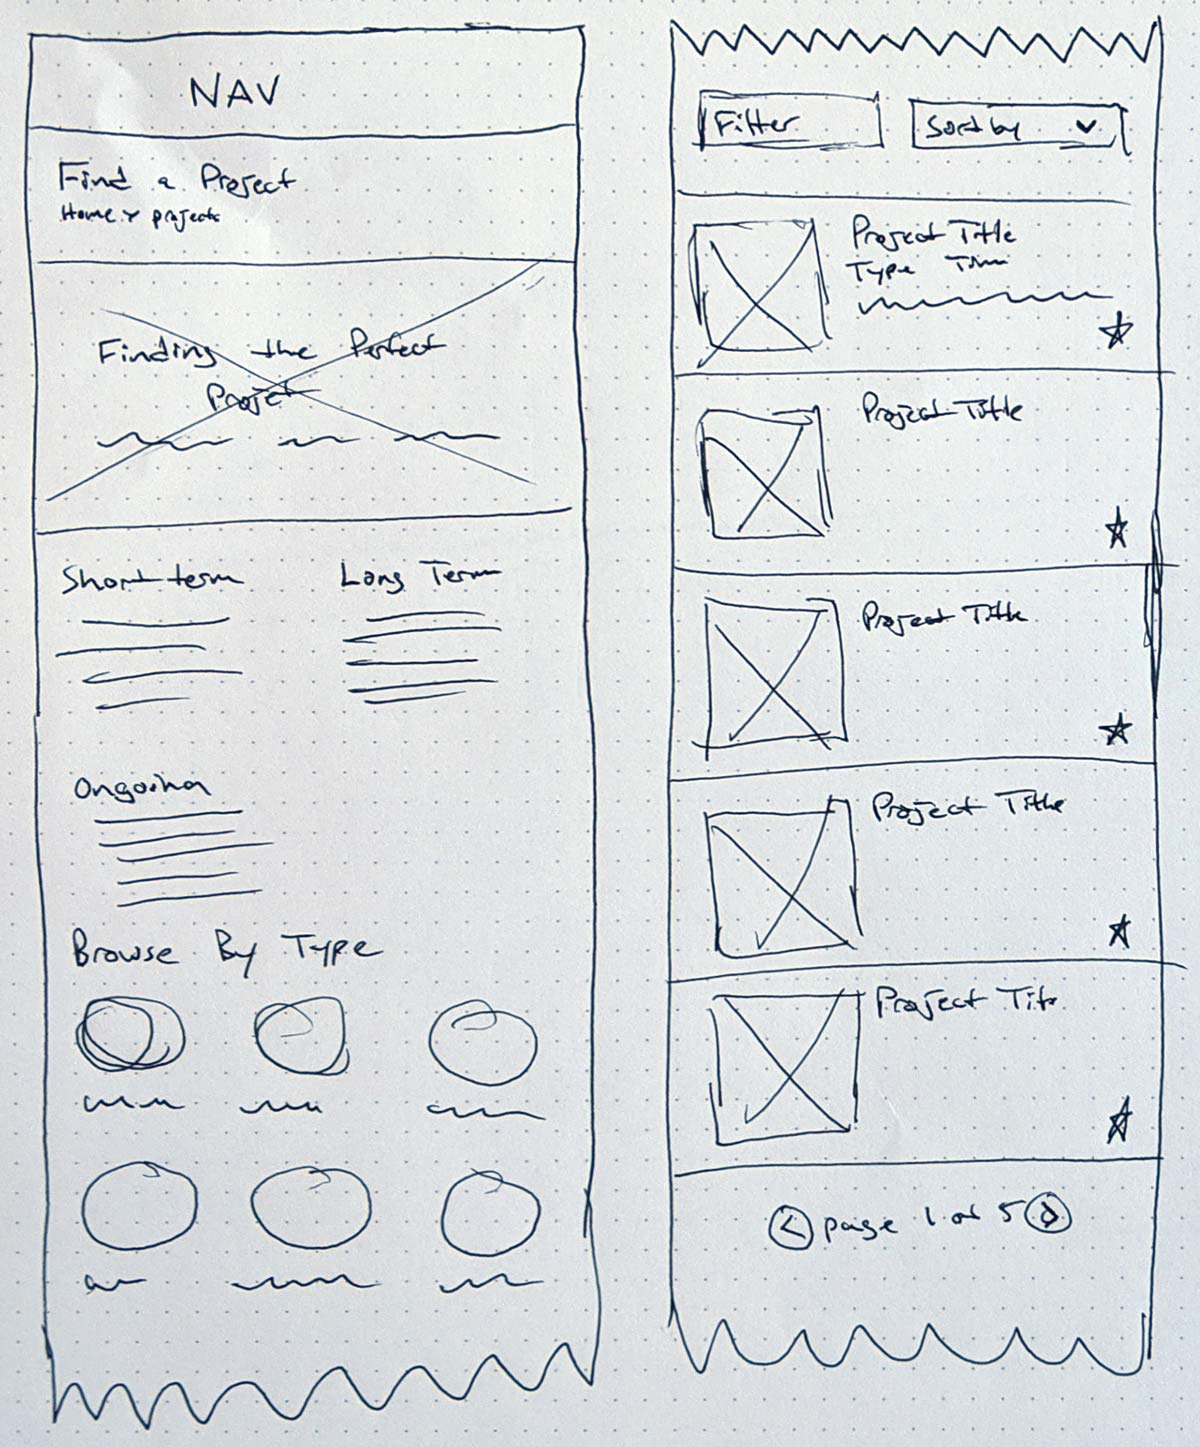 Sketch of category page with Issues Navigation